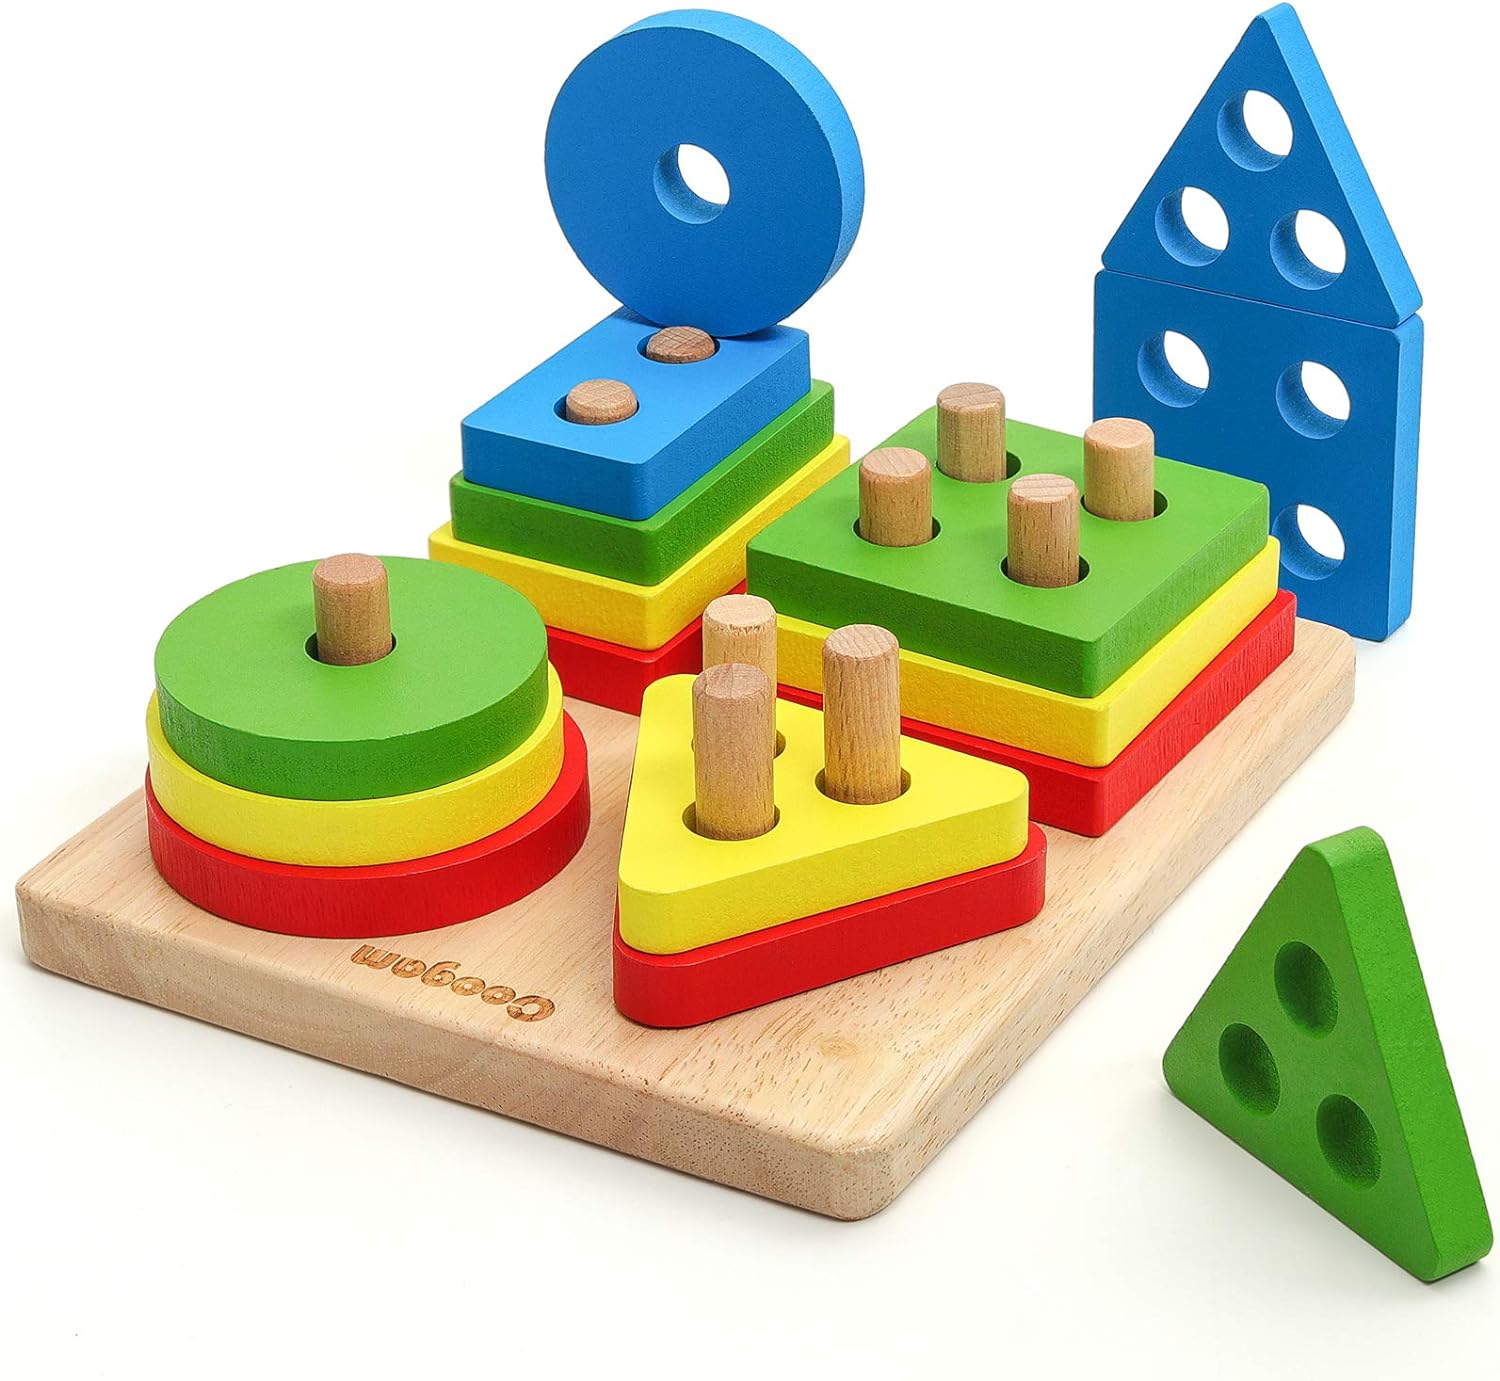 Wooden Geometry Block Puzzle Educational Math Number Sorting Stacking Toys 